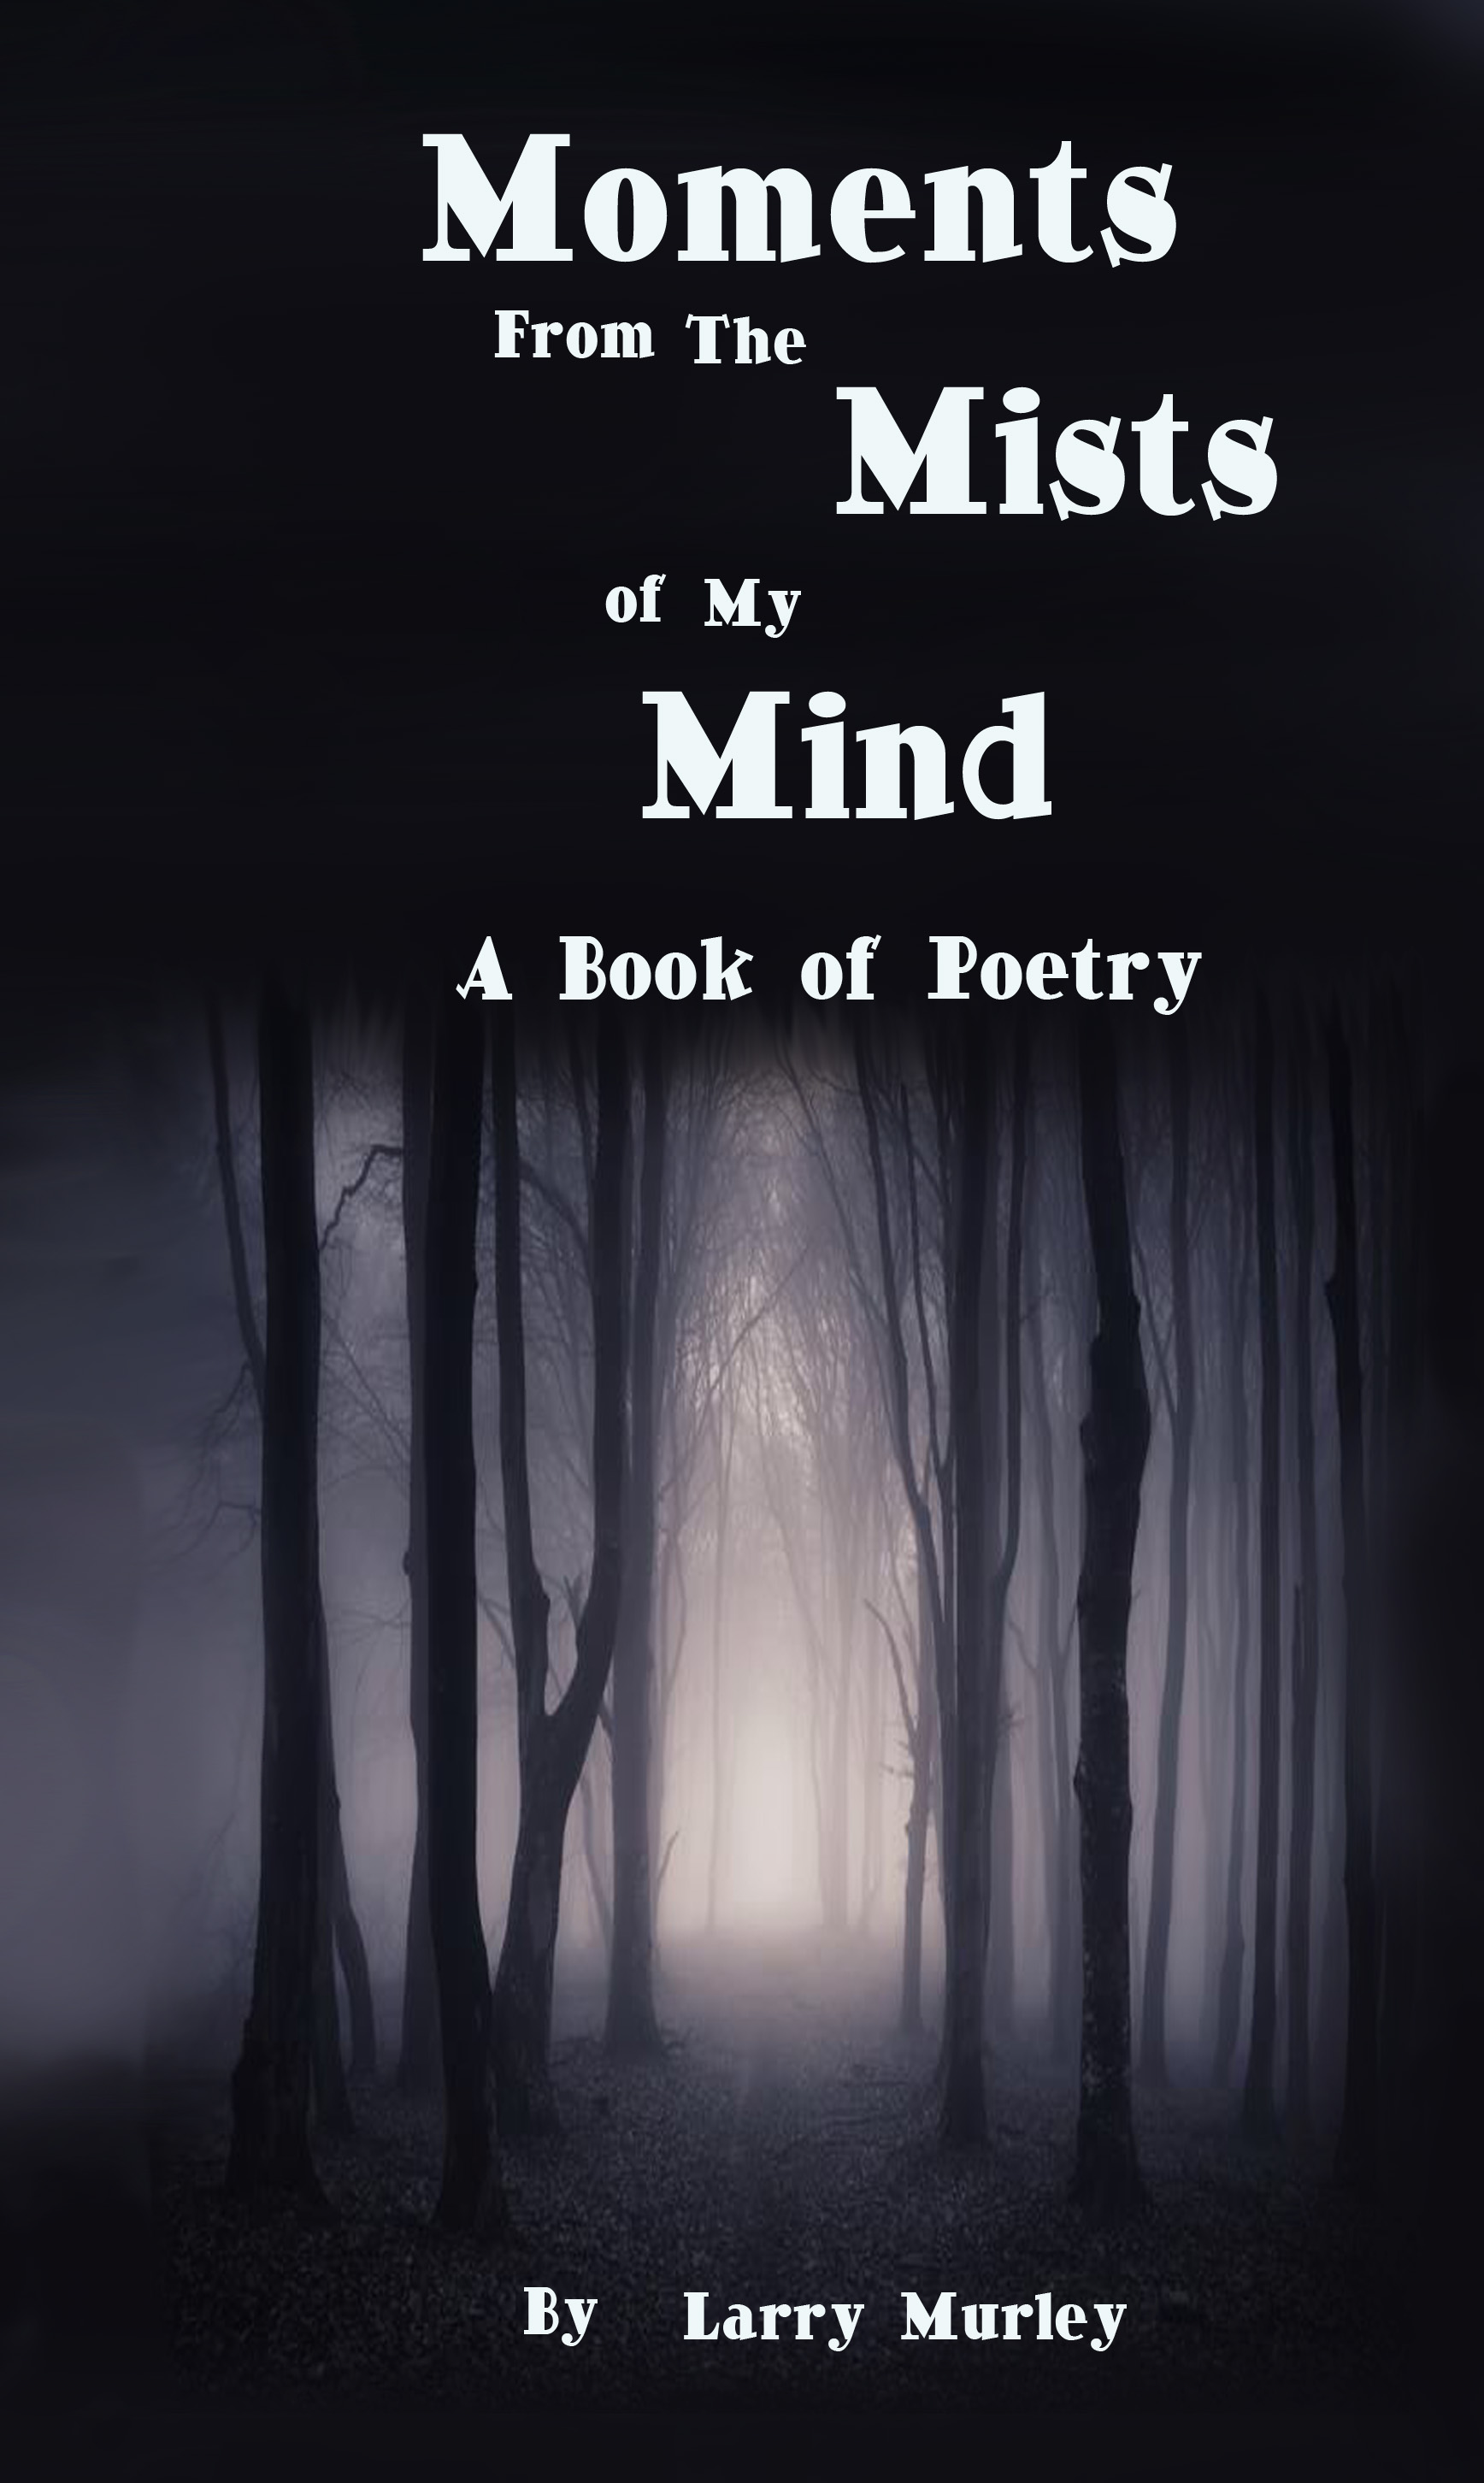 Moments From the Mists of My Mind - Poetry by Larry Murley